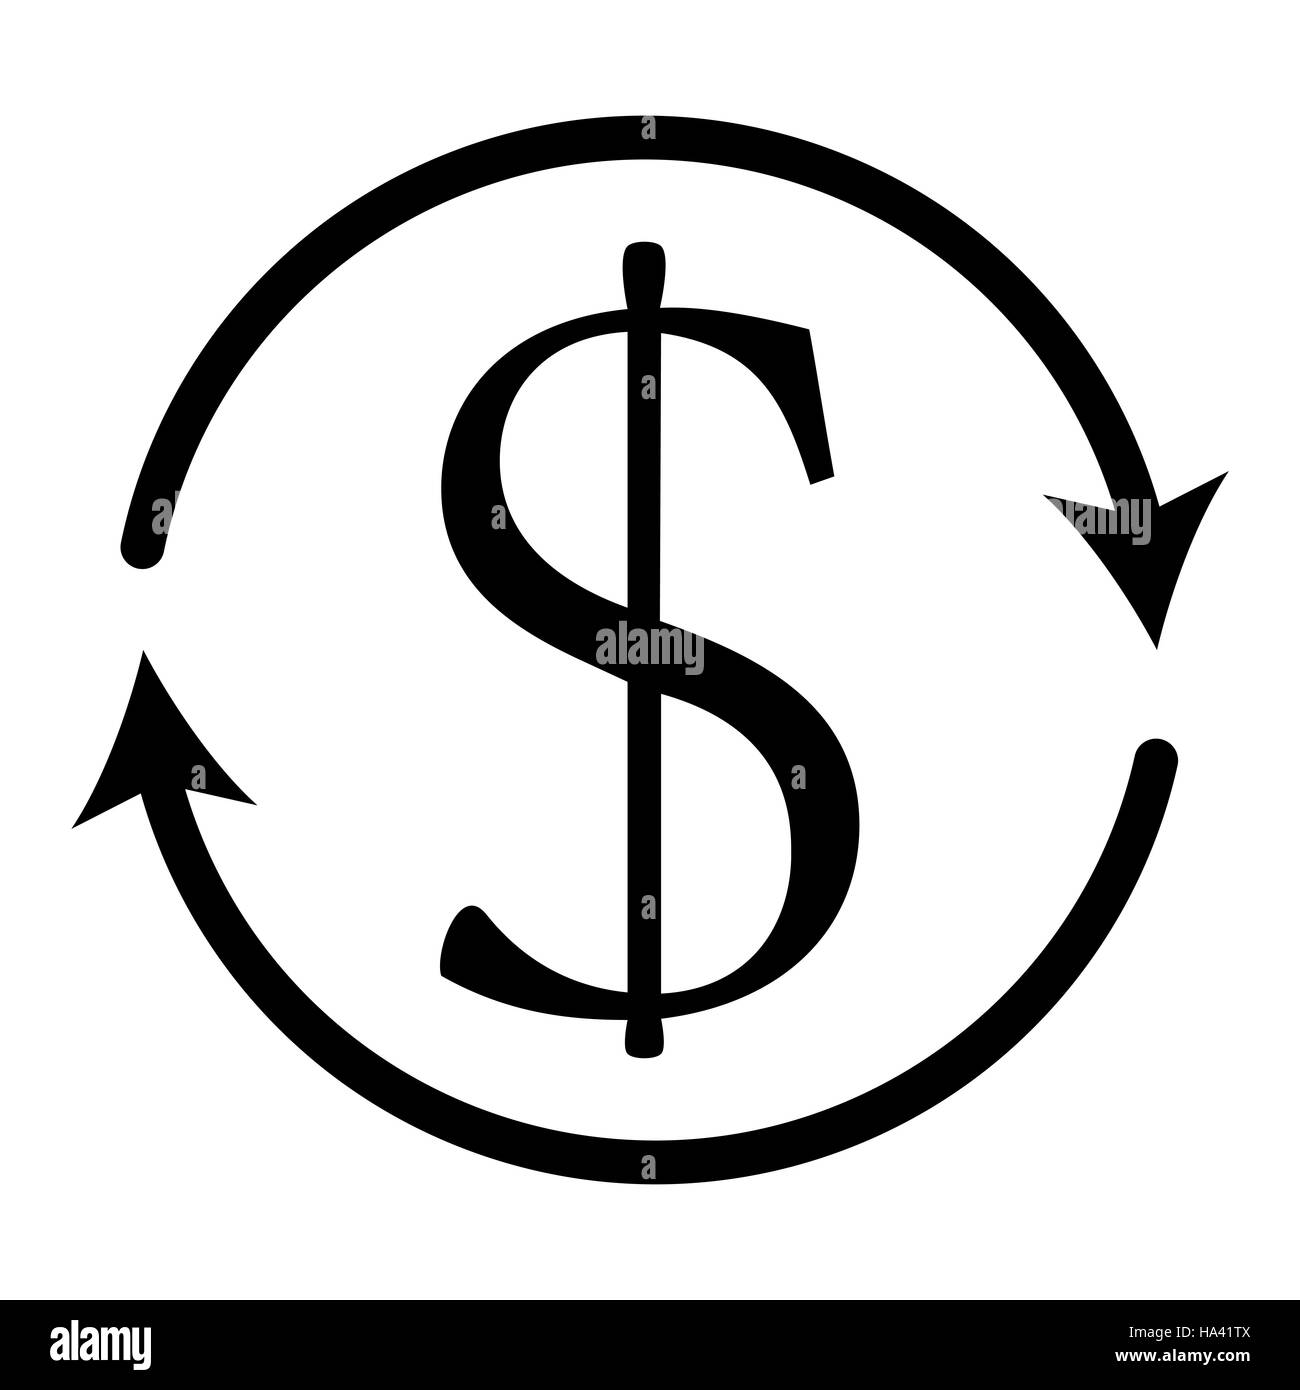 Dollar currency exchange. Money symbol arond arrow finance and business, vector illustration Stock Photo